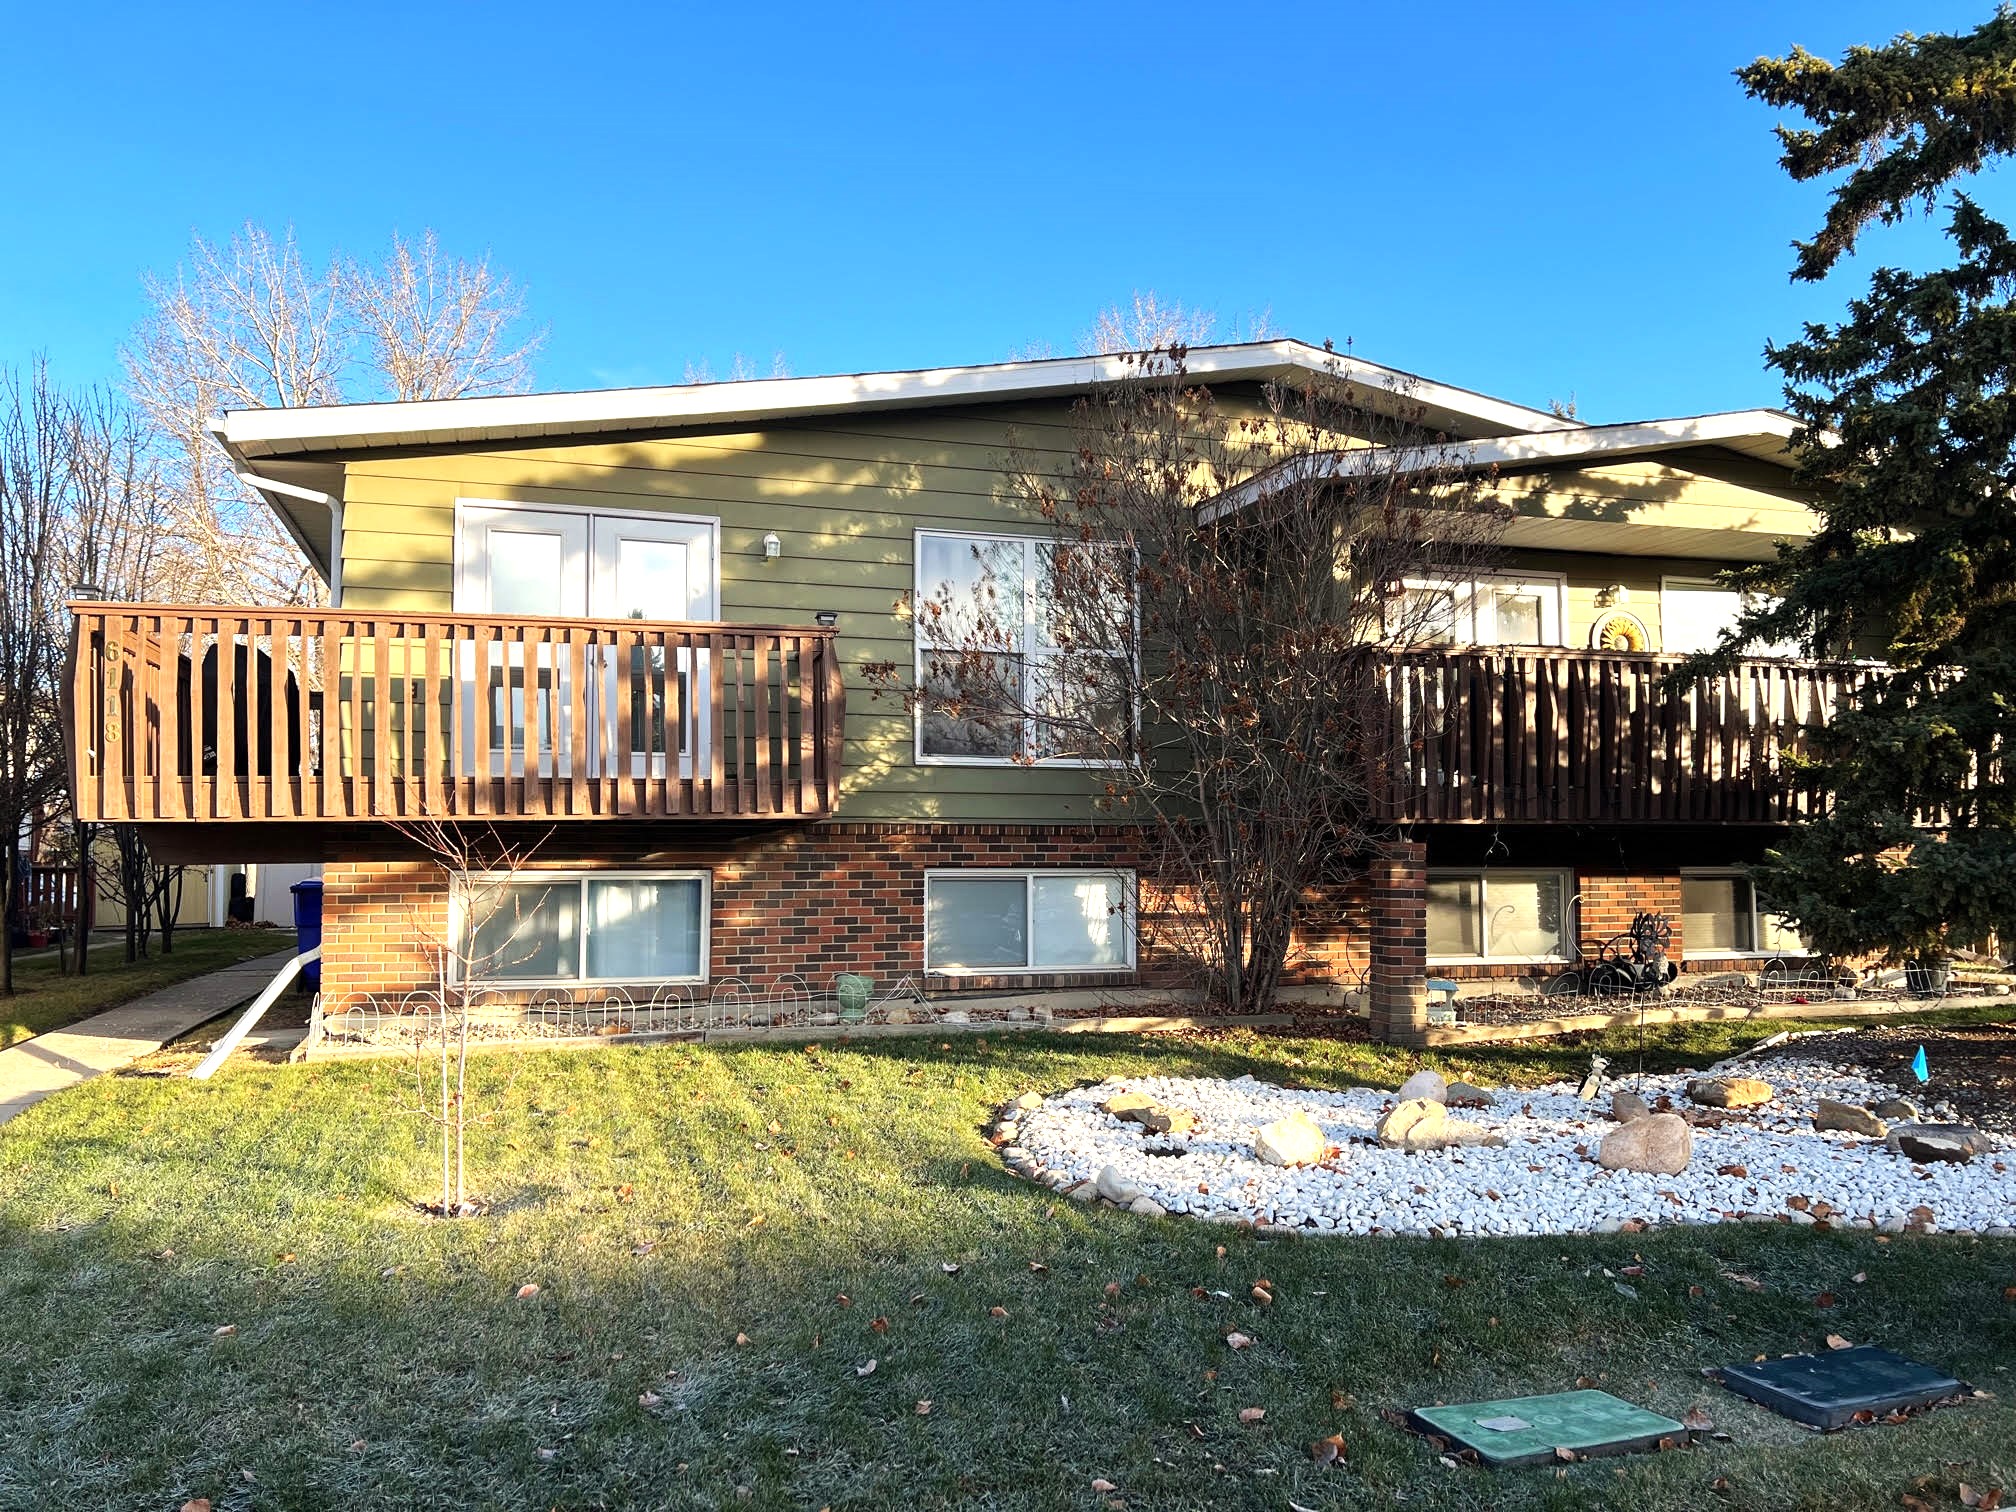 $209,900  Unit A, 6118-53 Street, Olds  SOLD